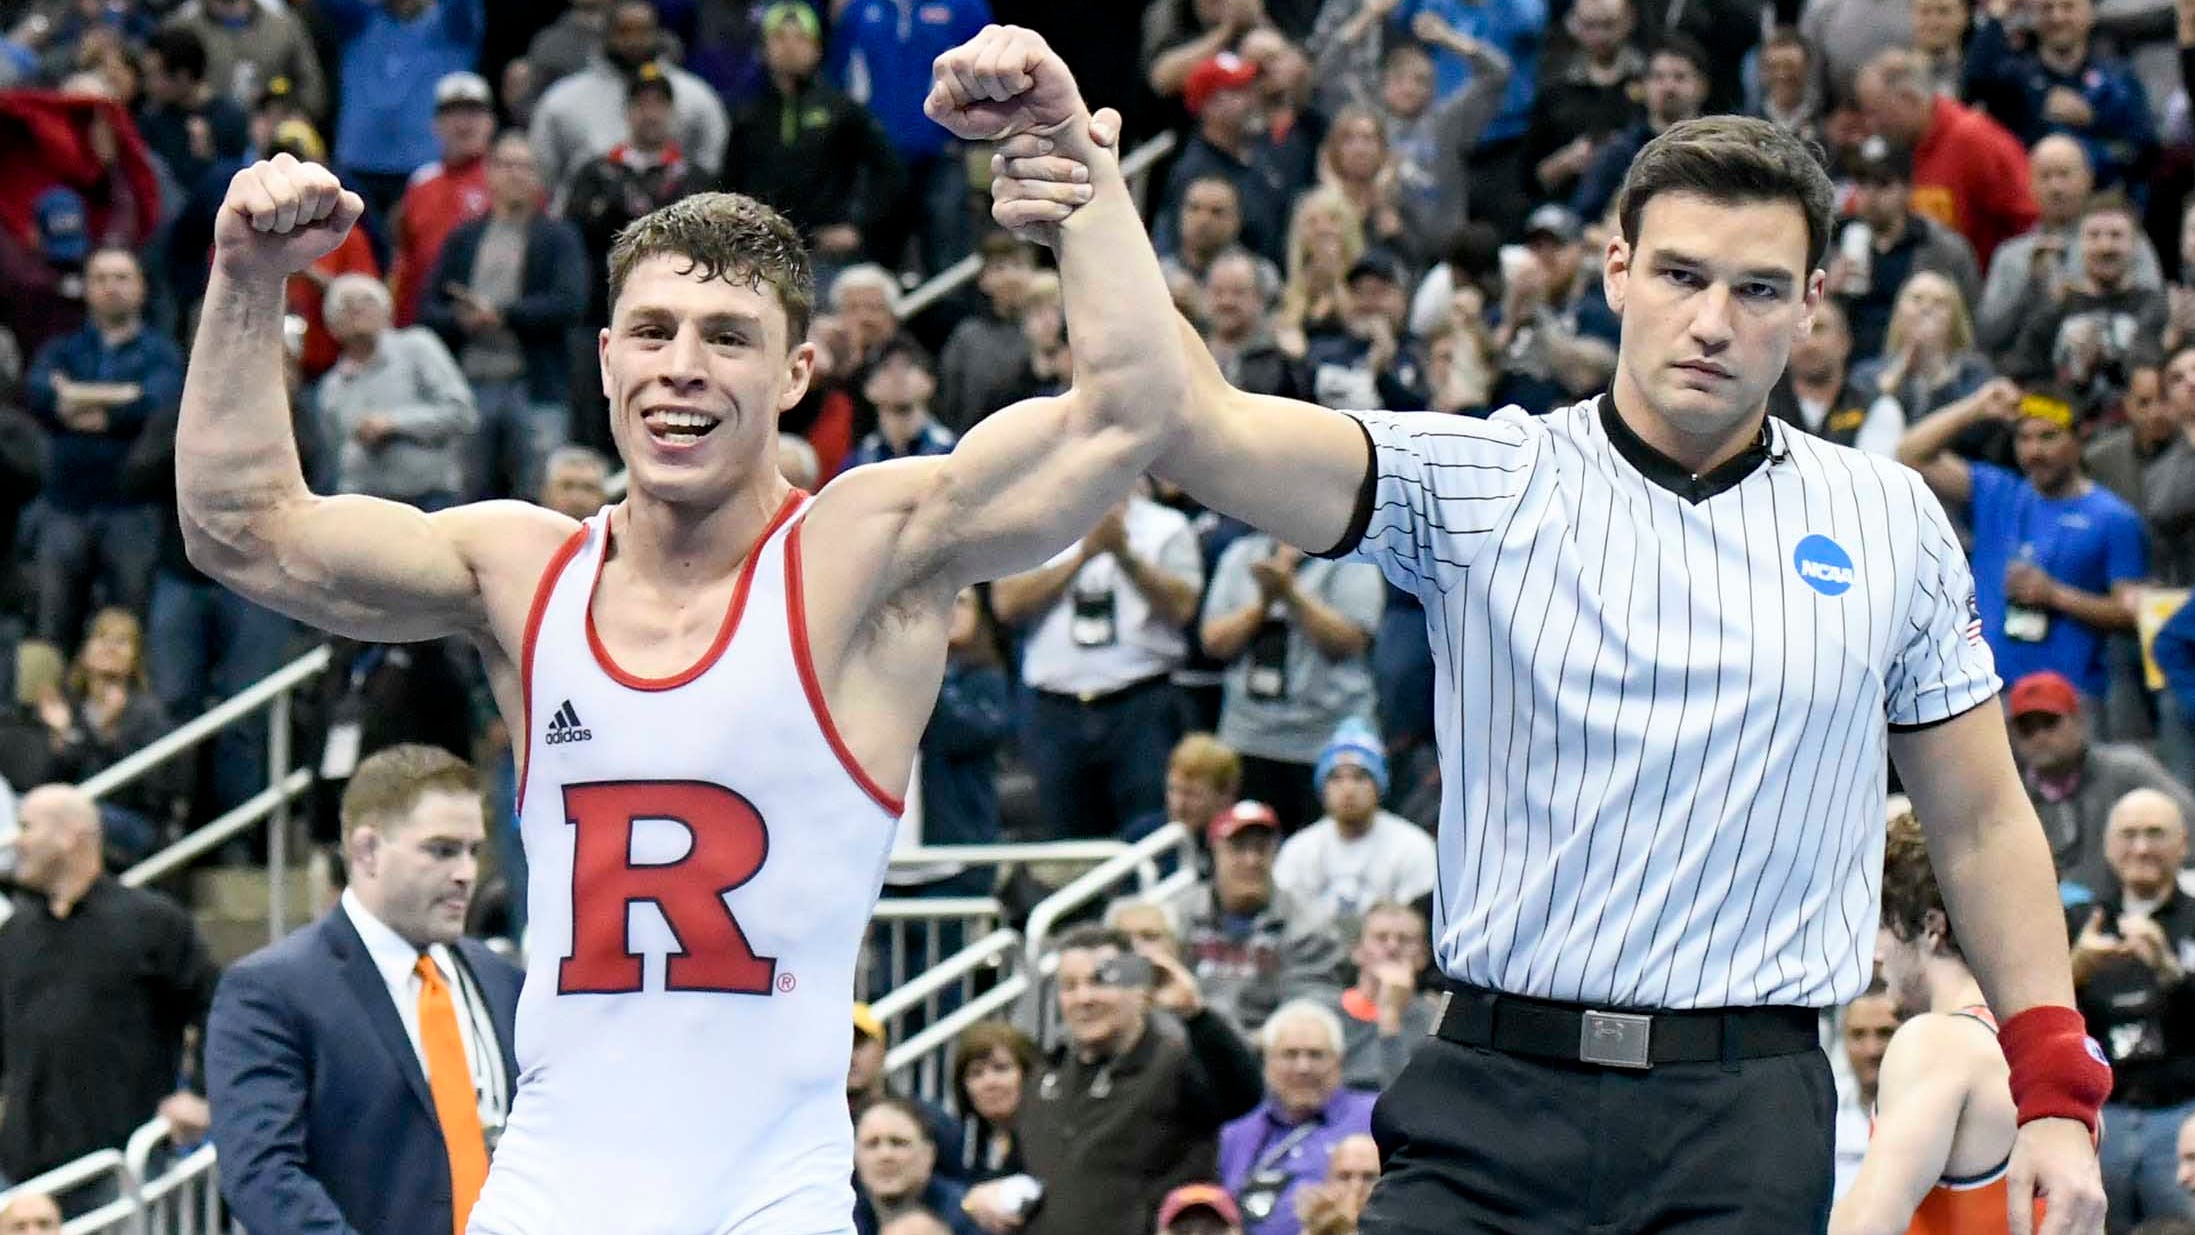 Nick Suriano brings Rutgers wrestling its first national title